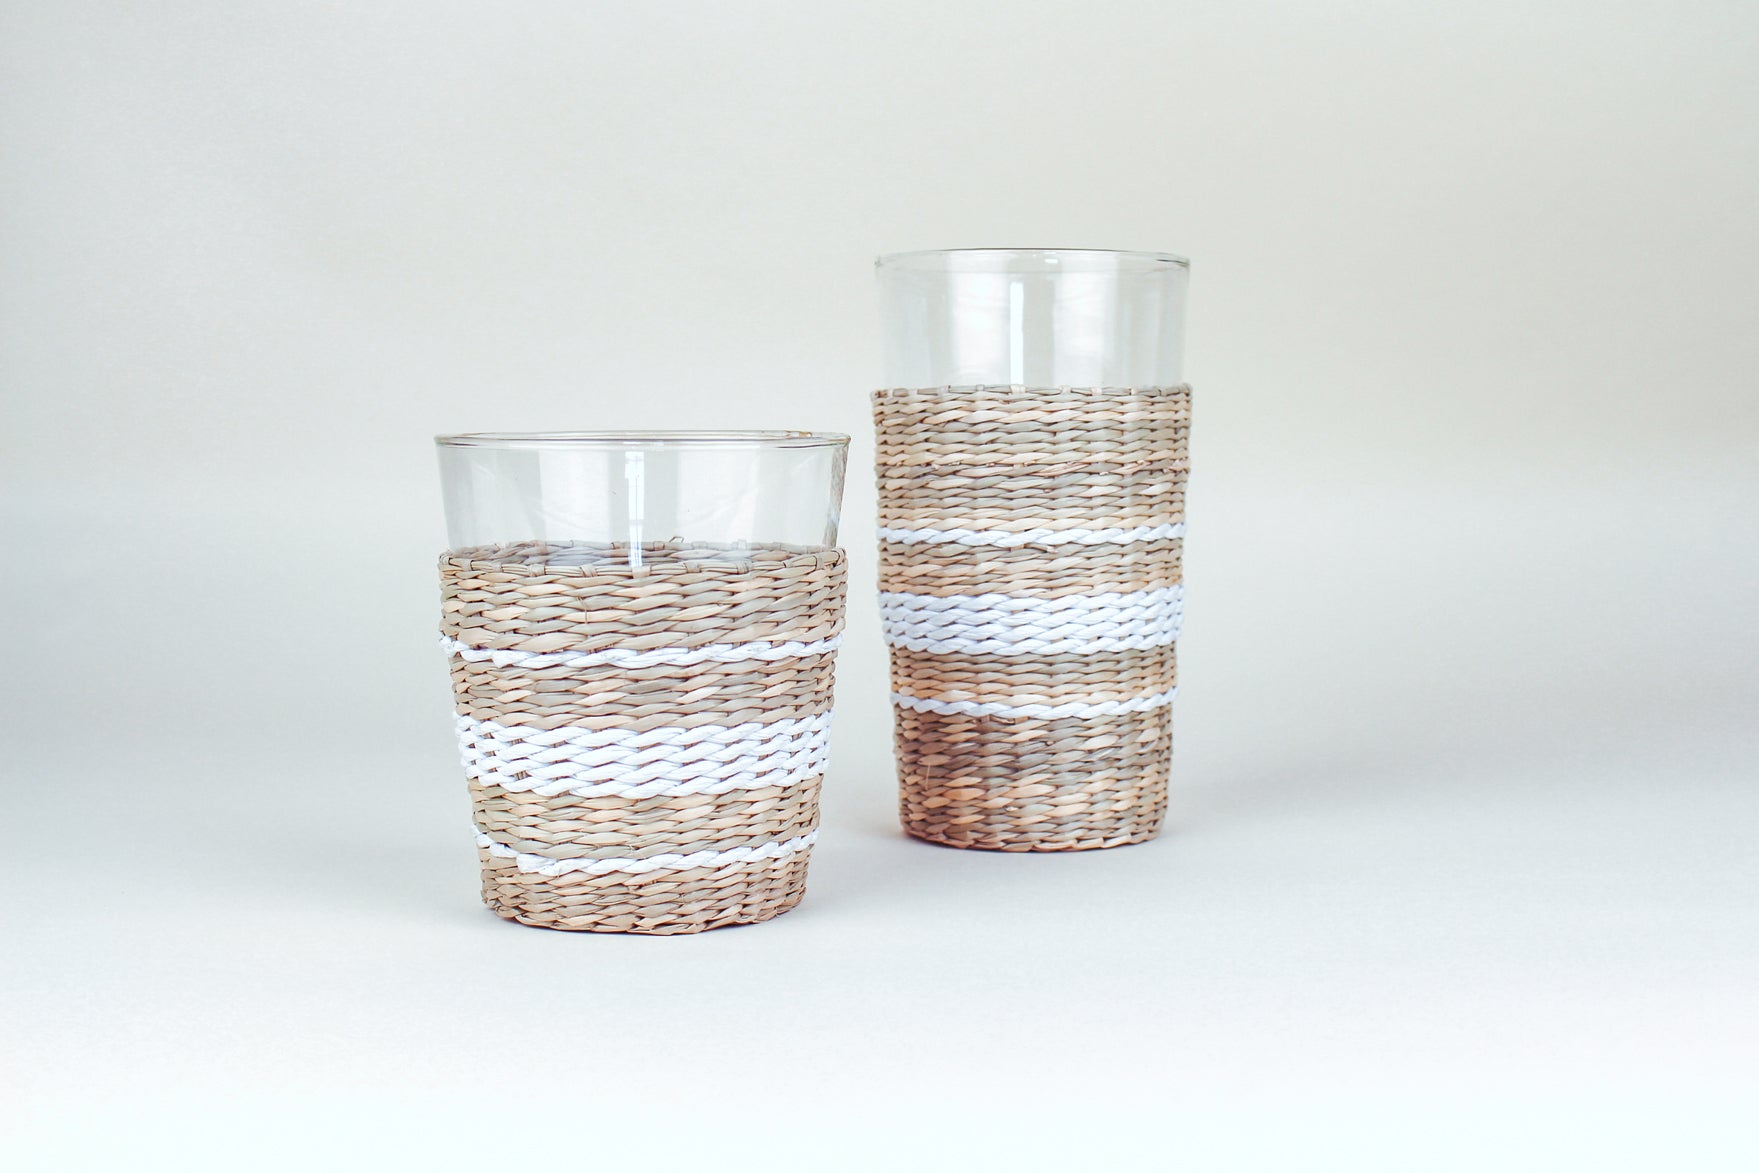 White Collection Seagrass Highball (Now 25% off!) Glass Seagrass Brand_Seagrass & Rattan Kitchen_Drinkware lm New Arrivals Seagrass Tumblers & Highballs White-Stripe-Seagrass-Highball-and-Tumbler-6880-L4CNT-WH-and-6880-L001CNT-WH---small_31eec8cb-4ebb-4ce1-8fb7-d029f2915326